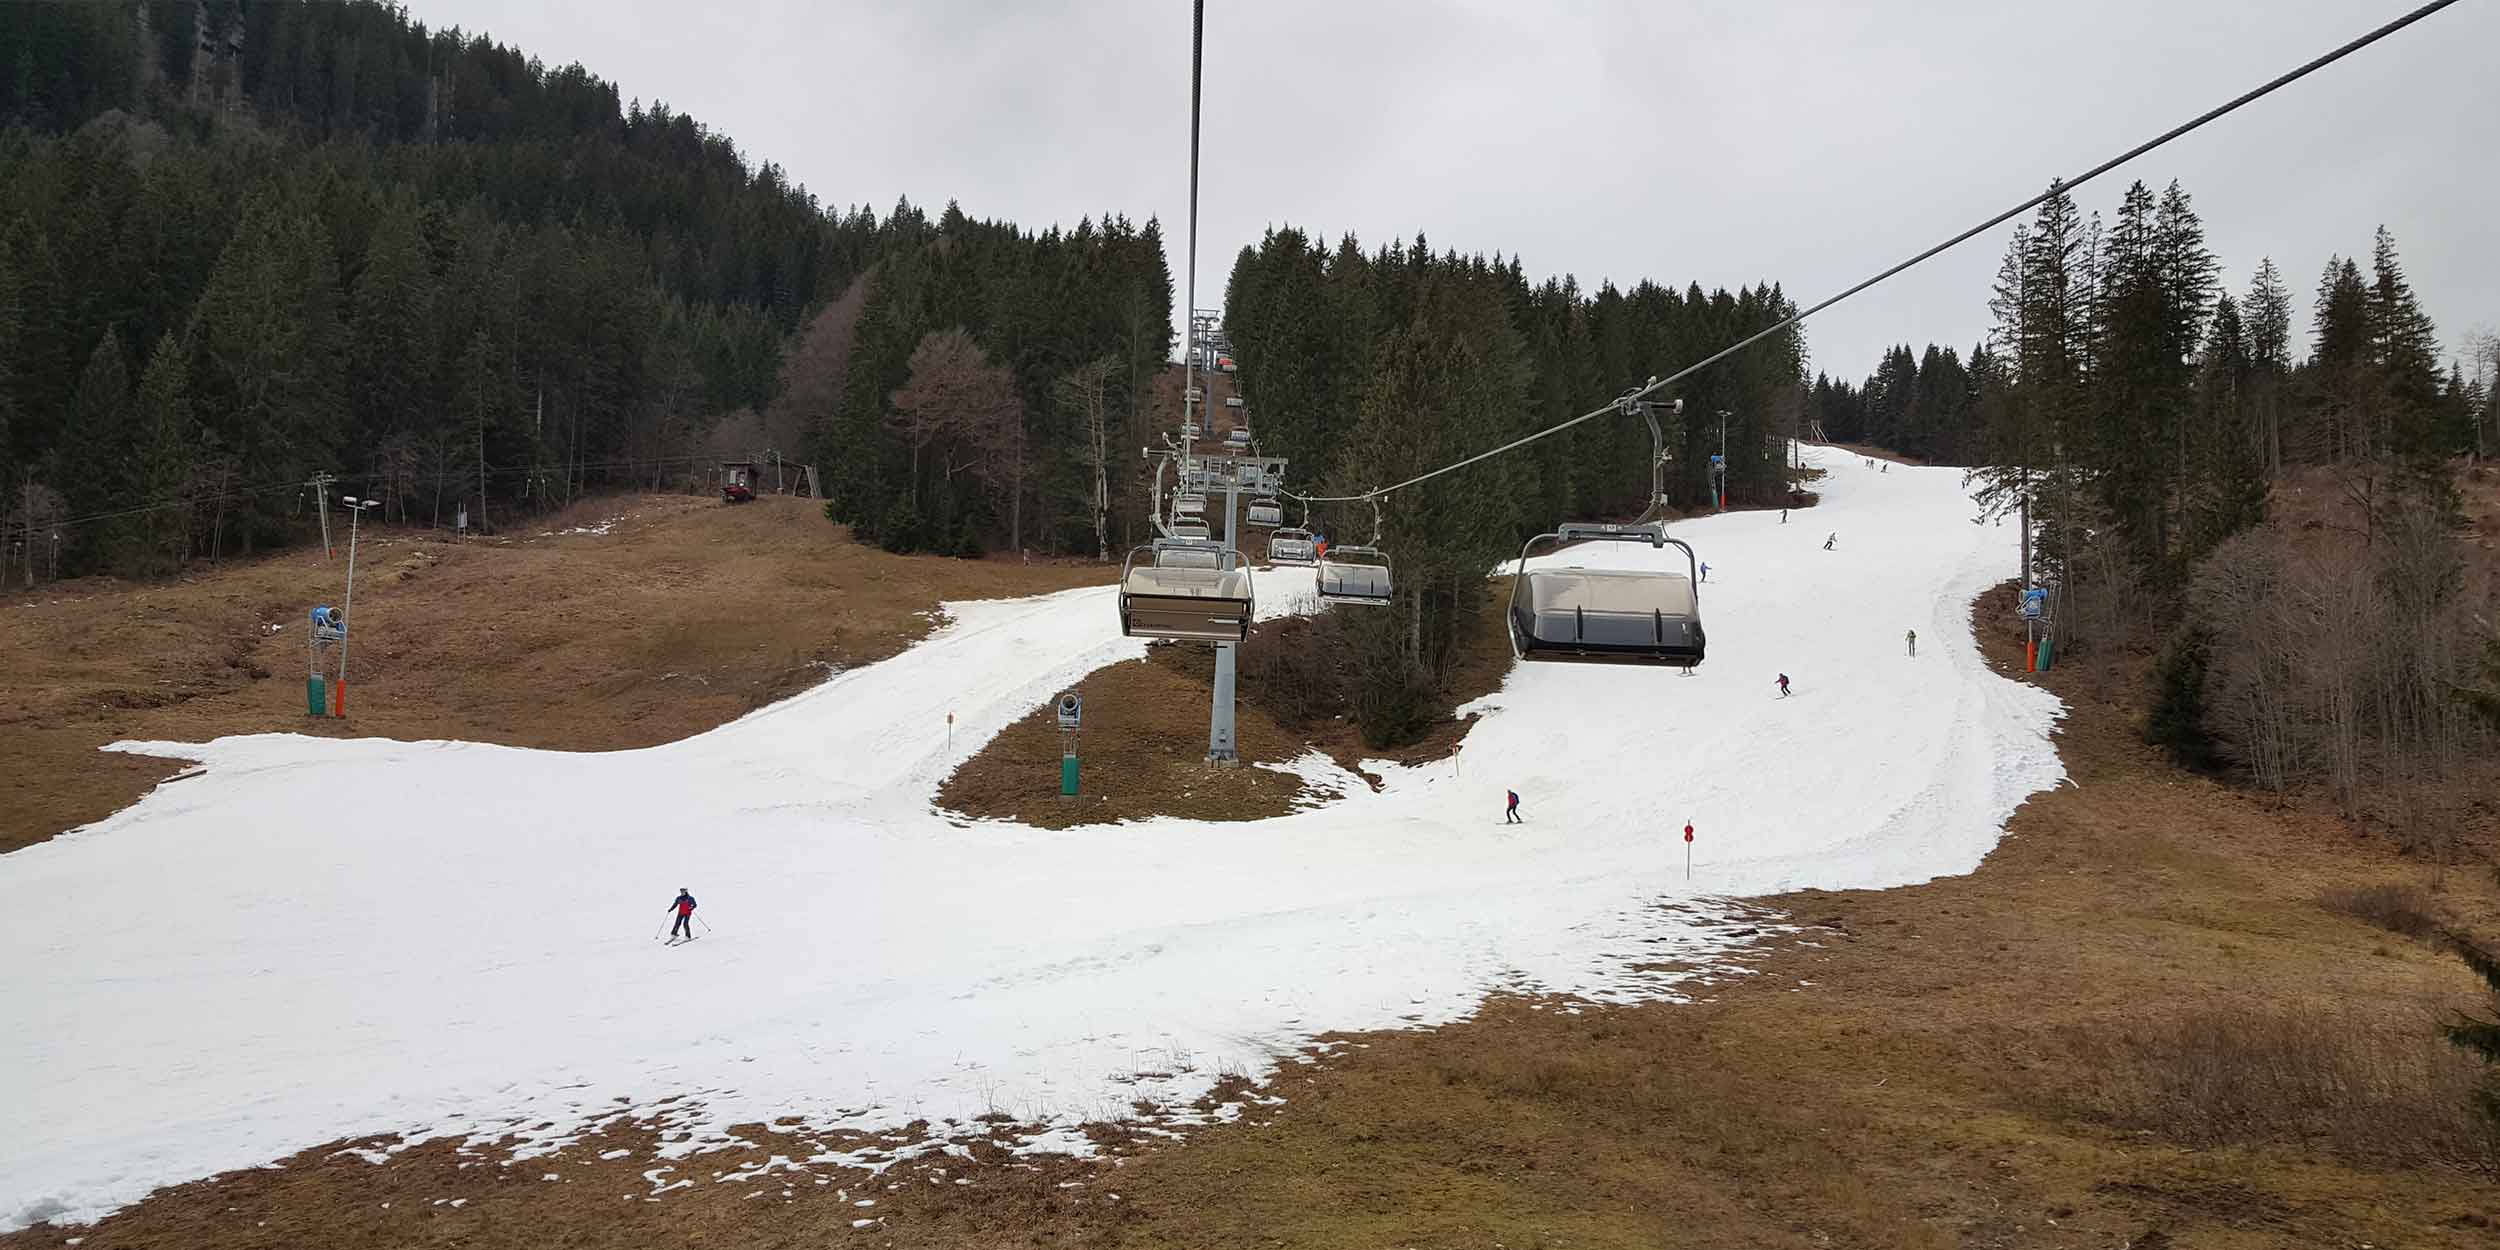 skiing area with a lift